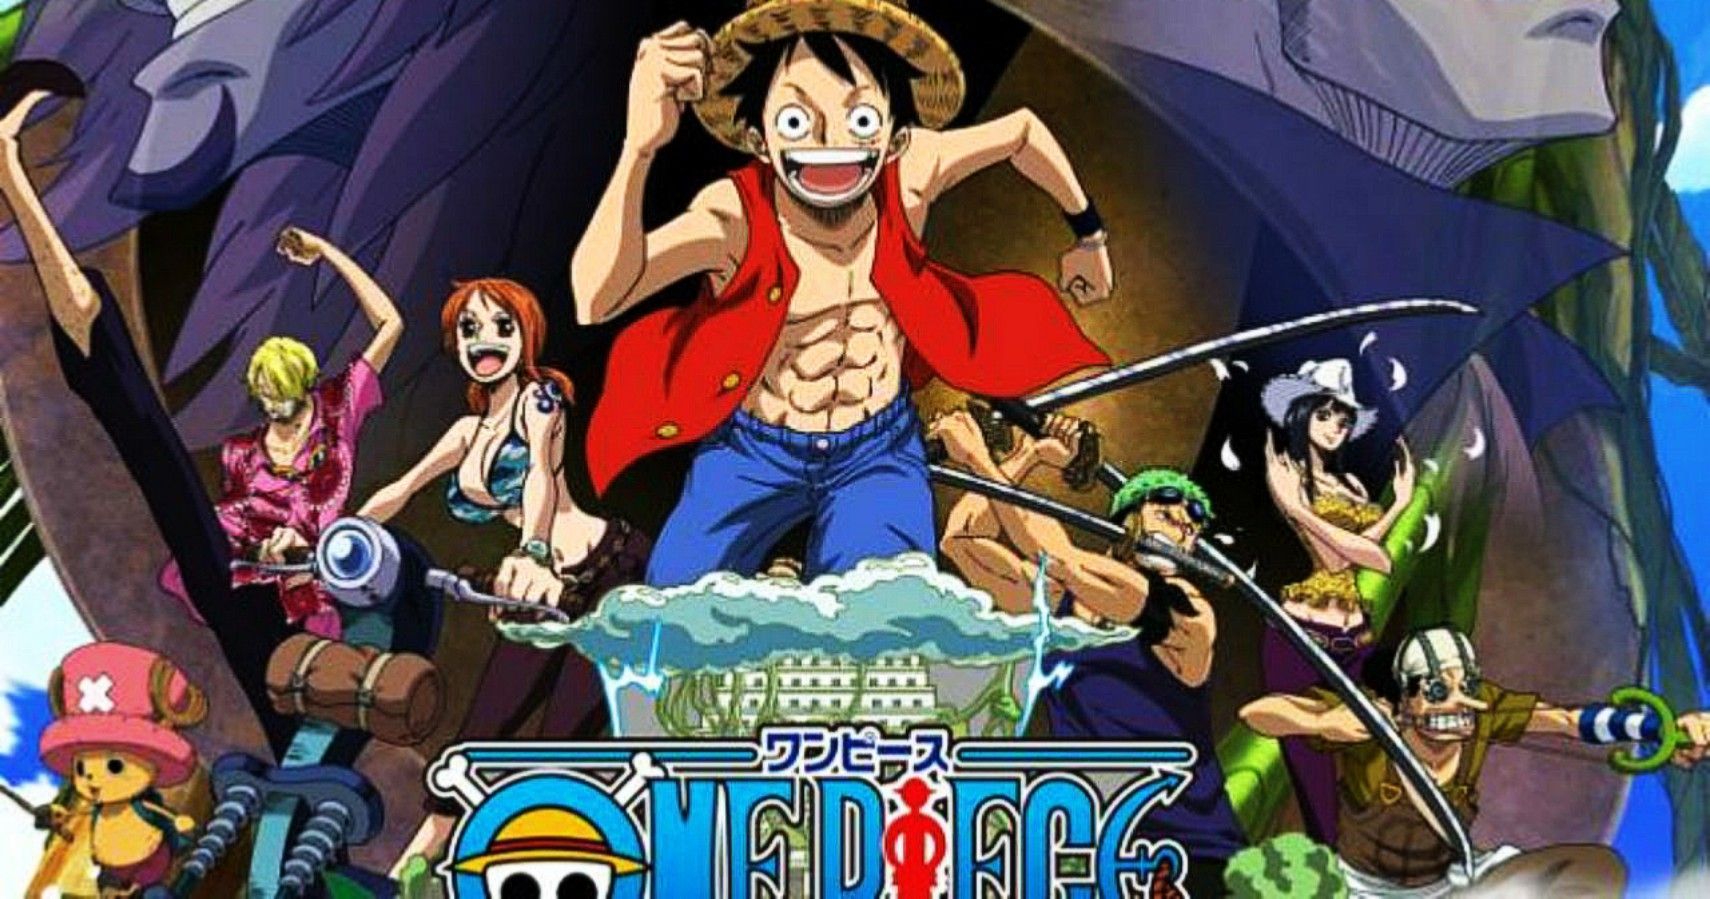 One piece wiki cant show a picture of shodai kitetsu as I've rewatched  the SKYPIEA arc (my favorite arc) I can't seem to neglect and notice the  guard of the sword of